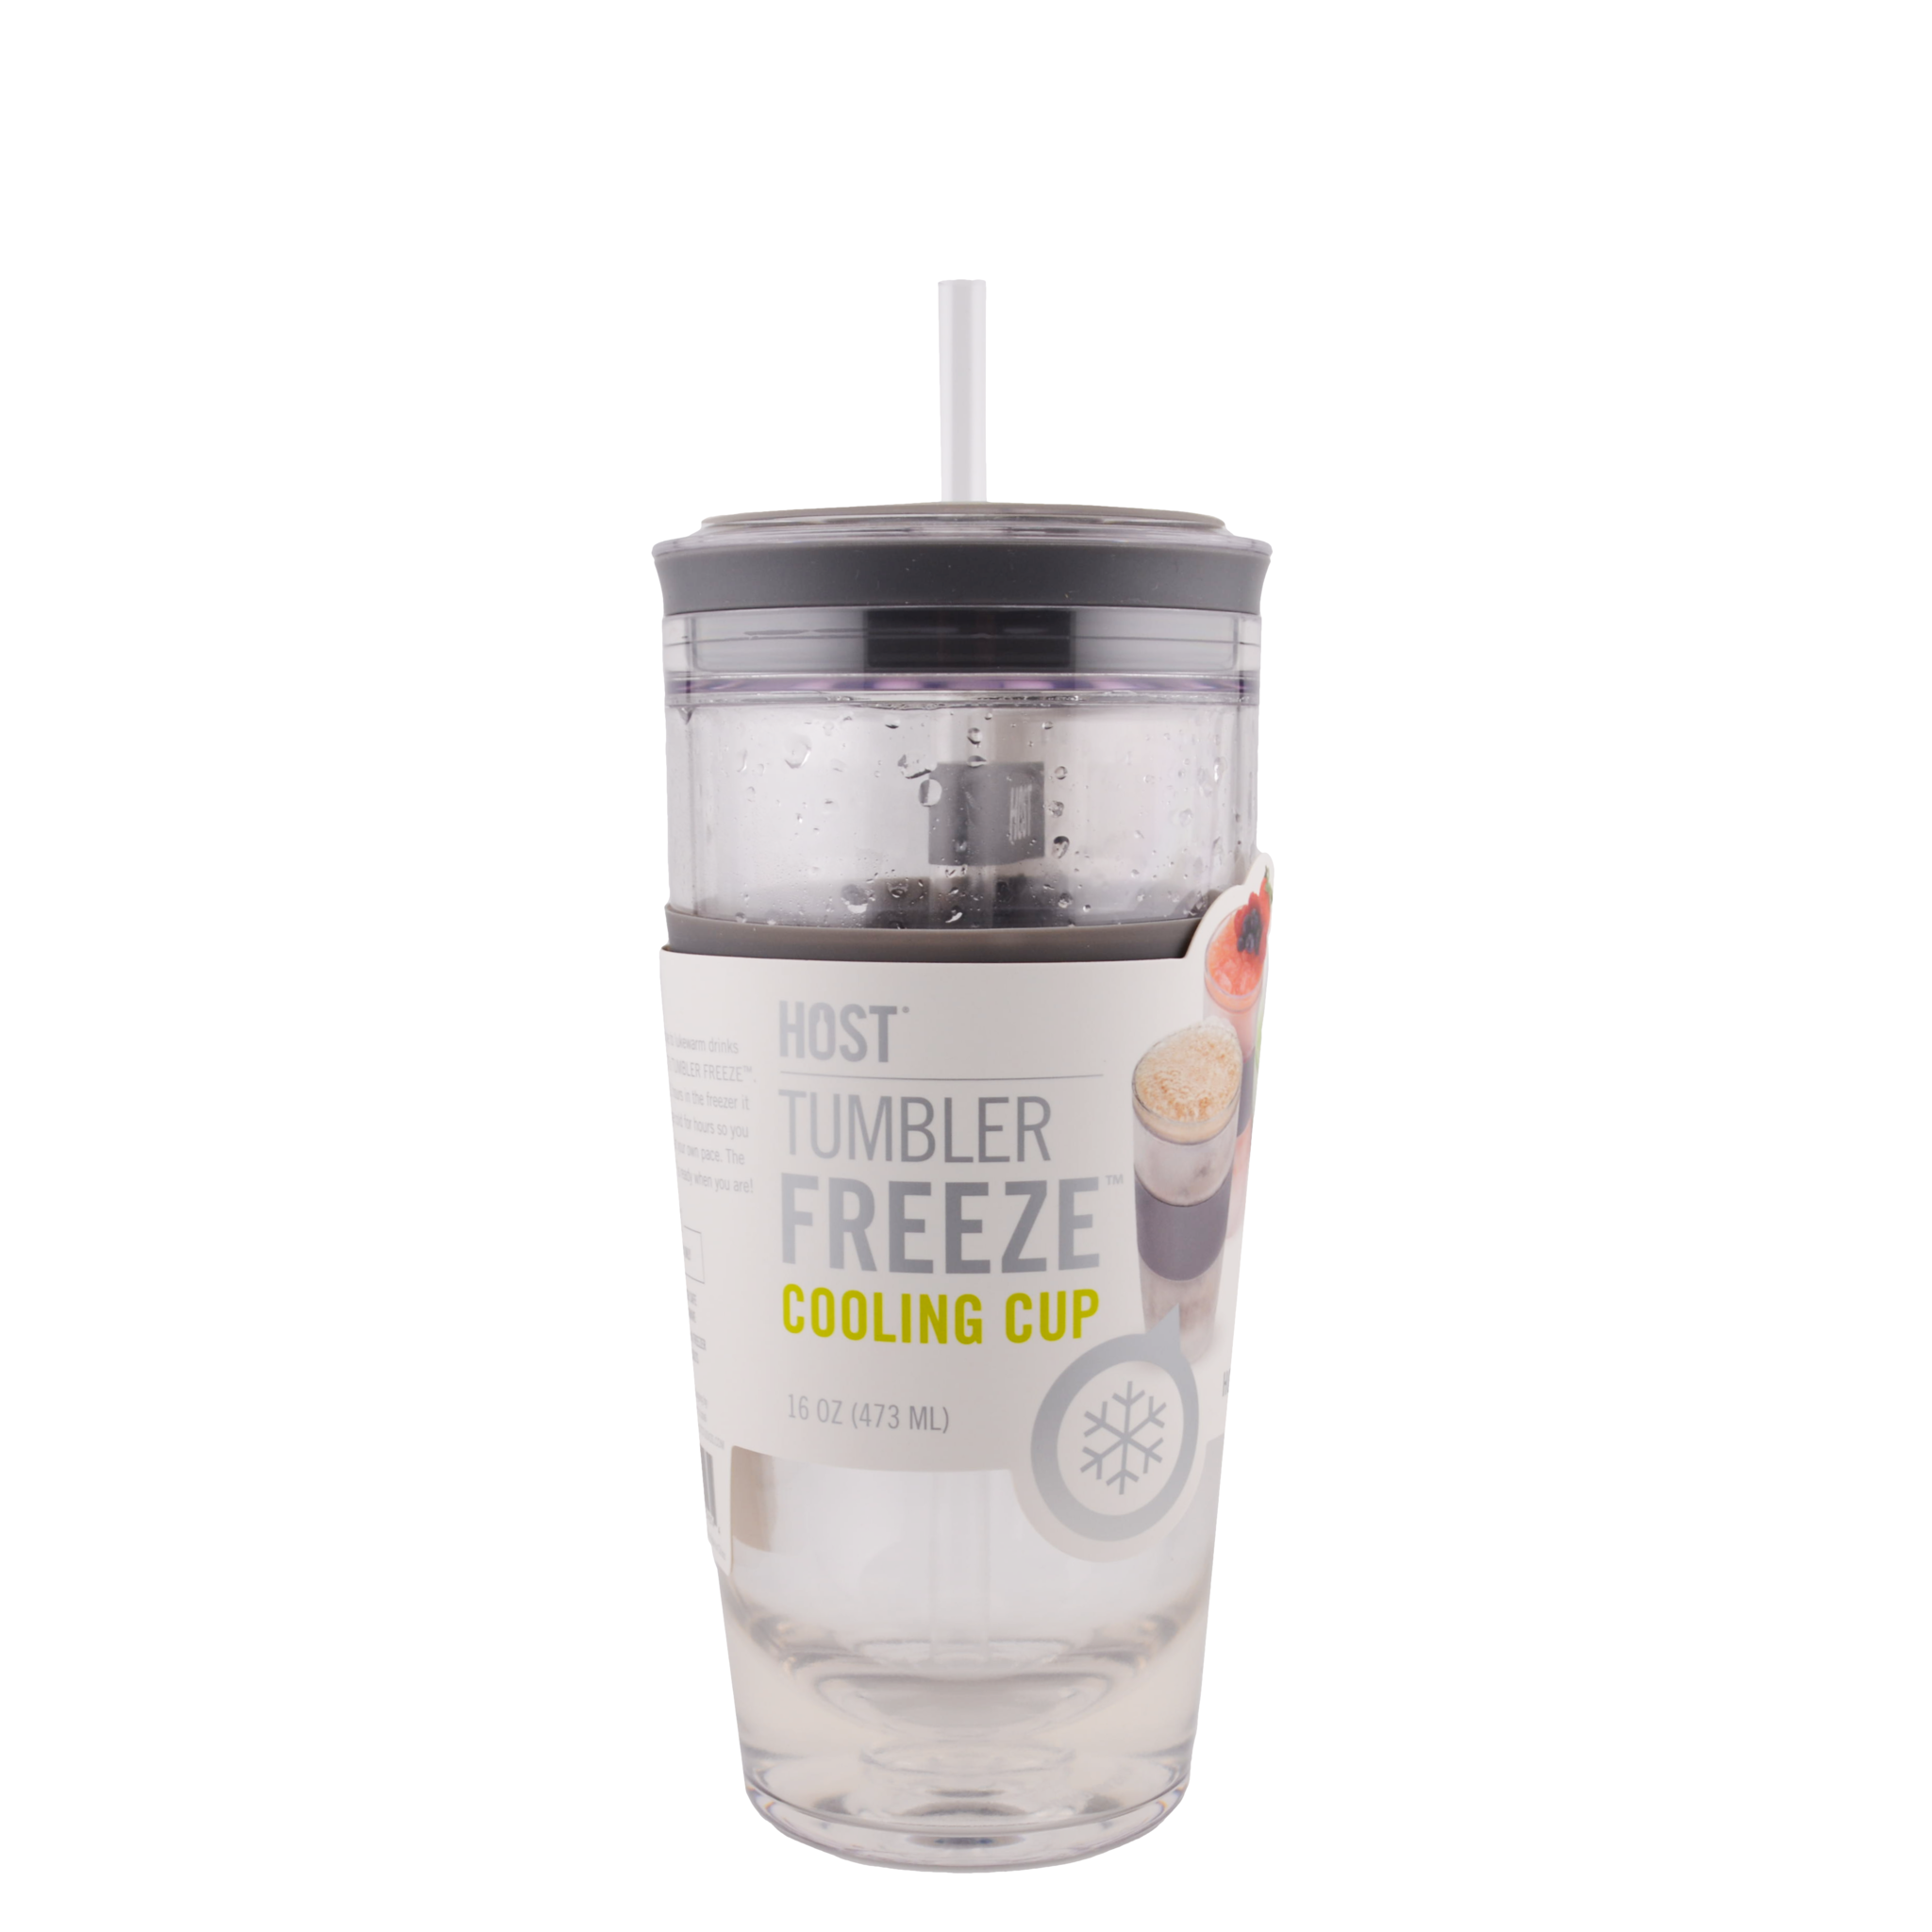 HOST TUMBLER FREEZE COOLING CUP W/ STRAW 16OZ - Grapes & Grains